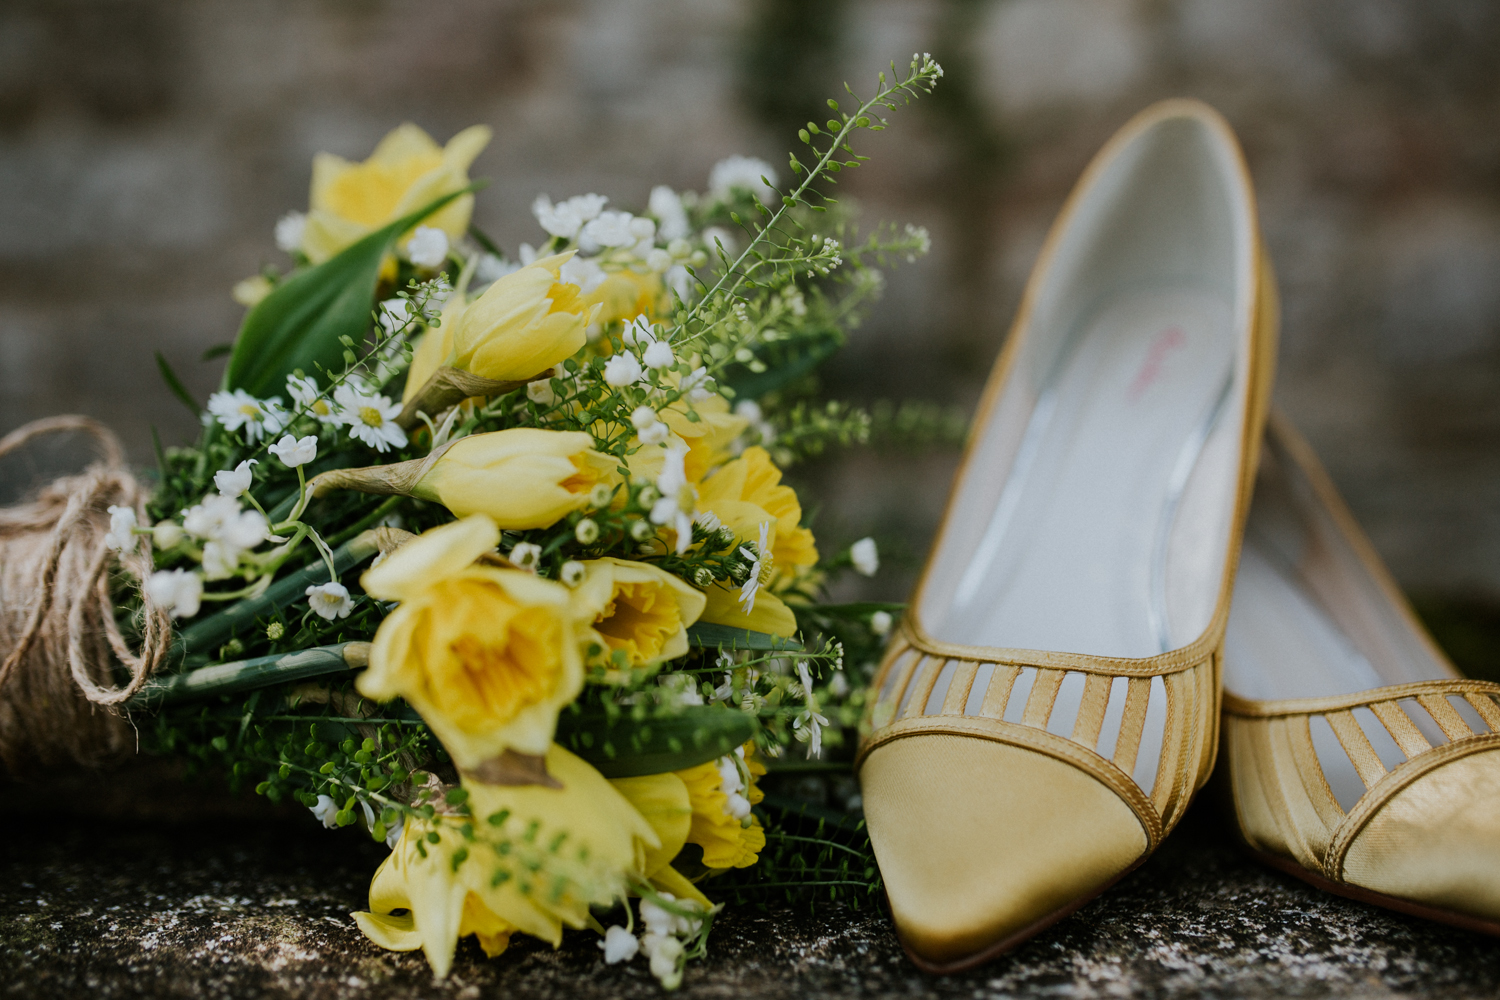 flowers and shoes